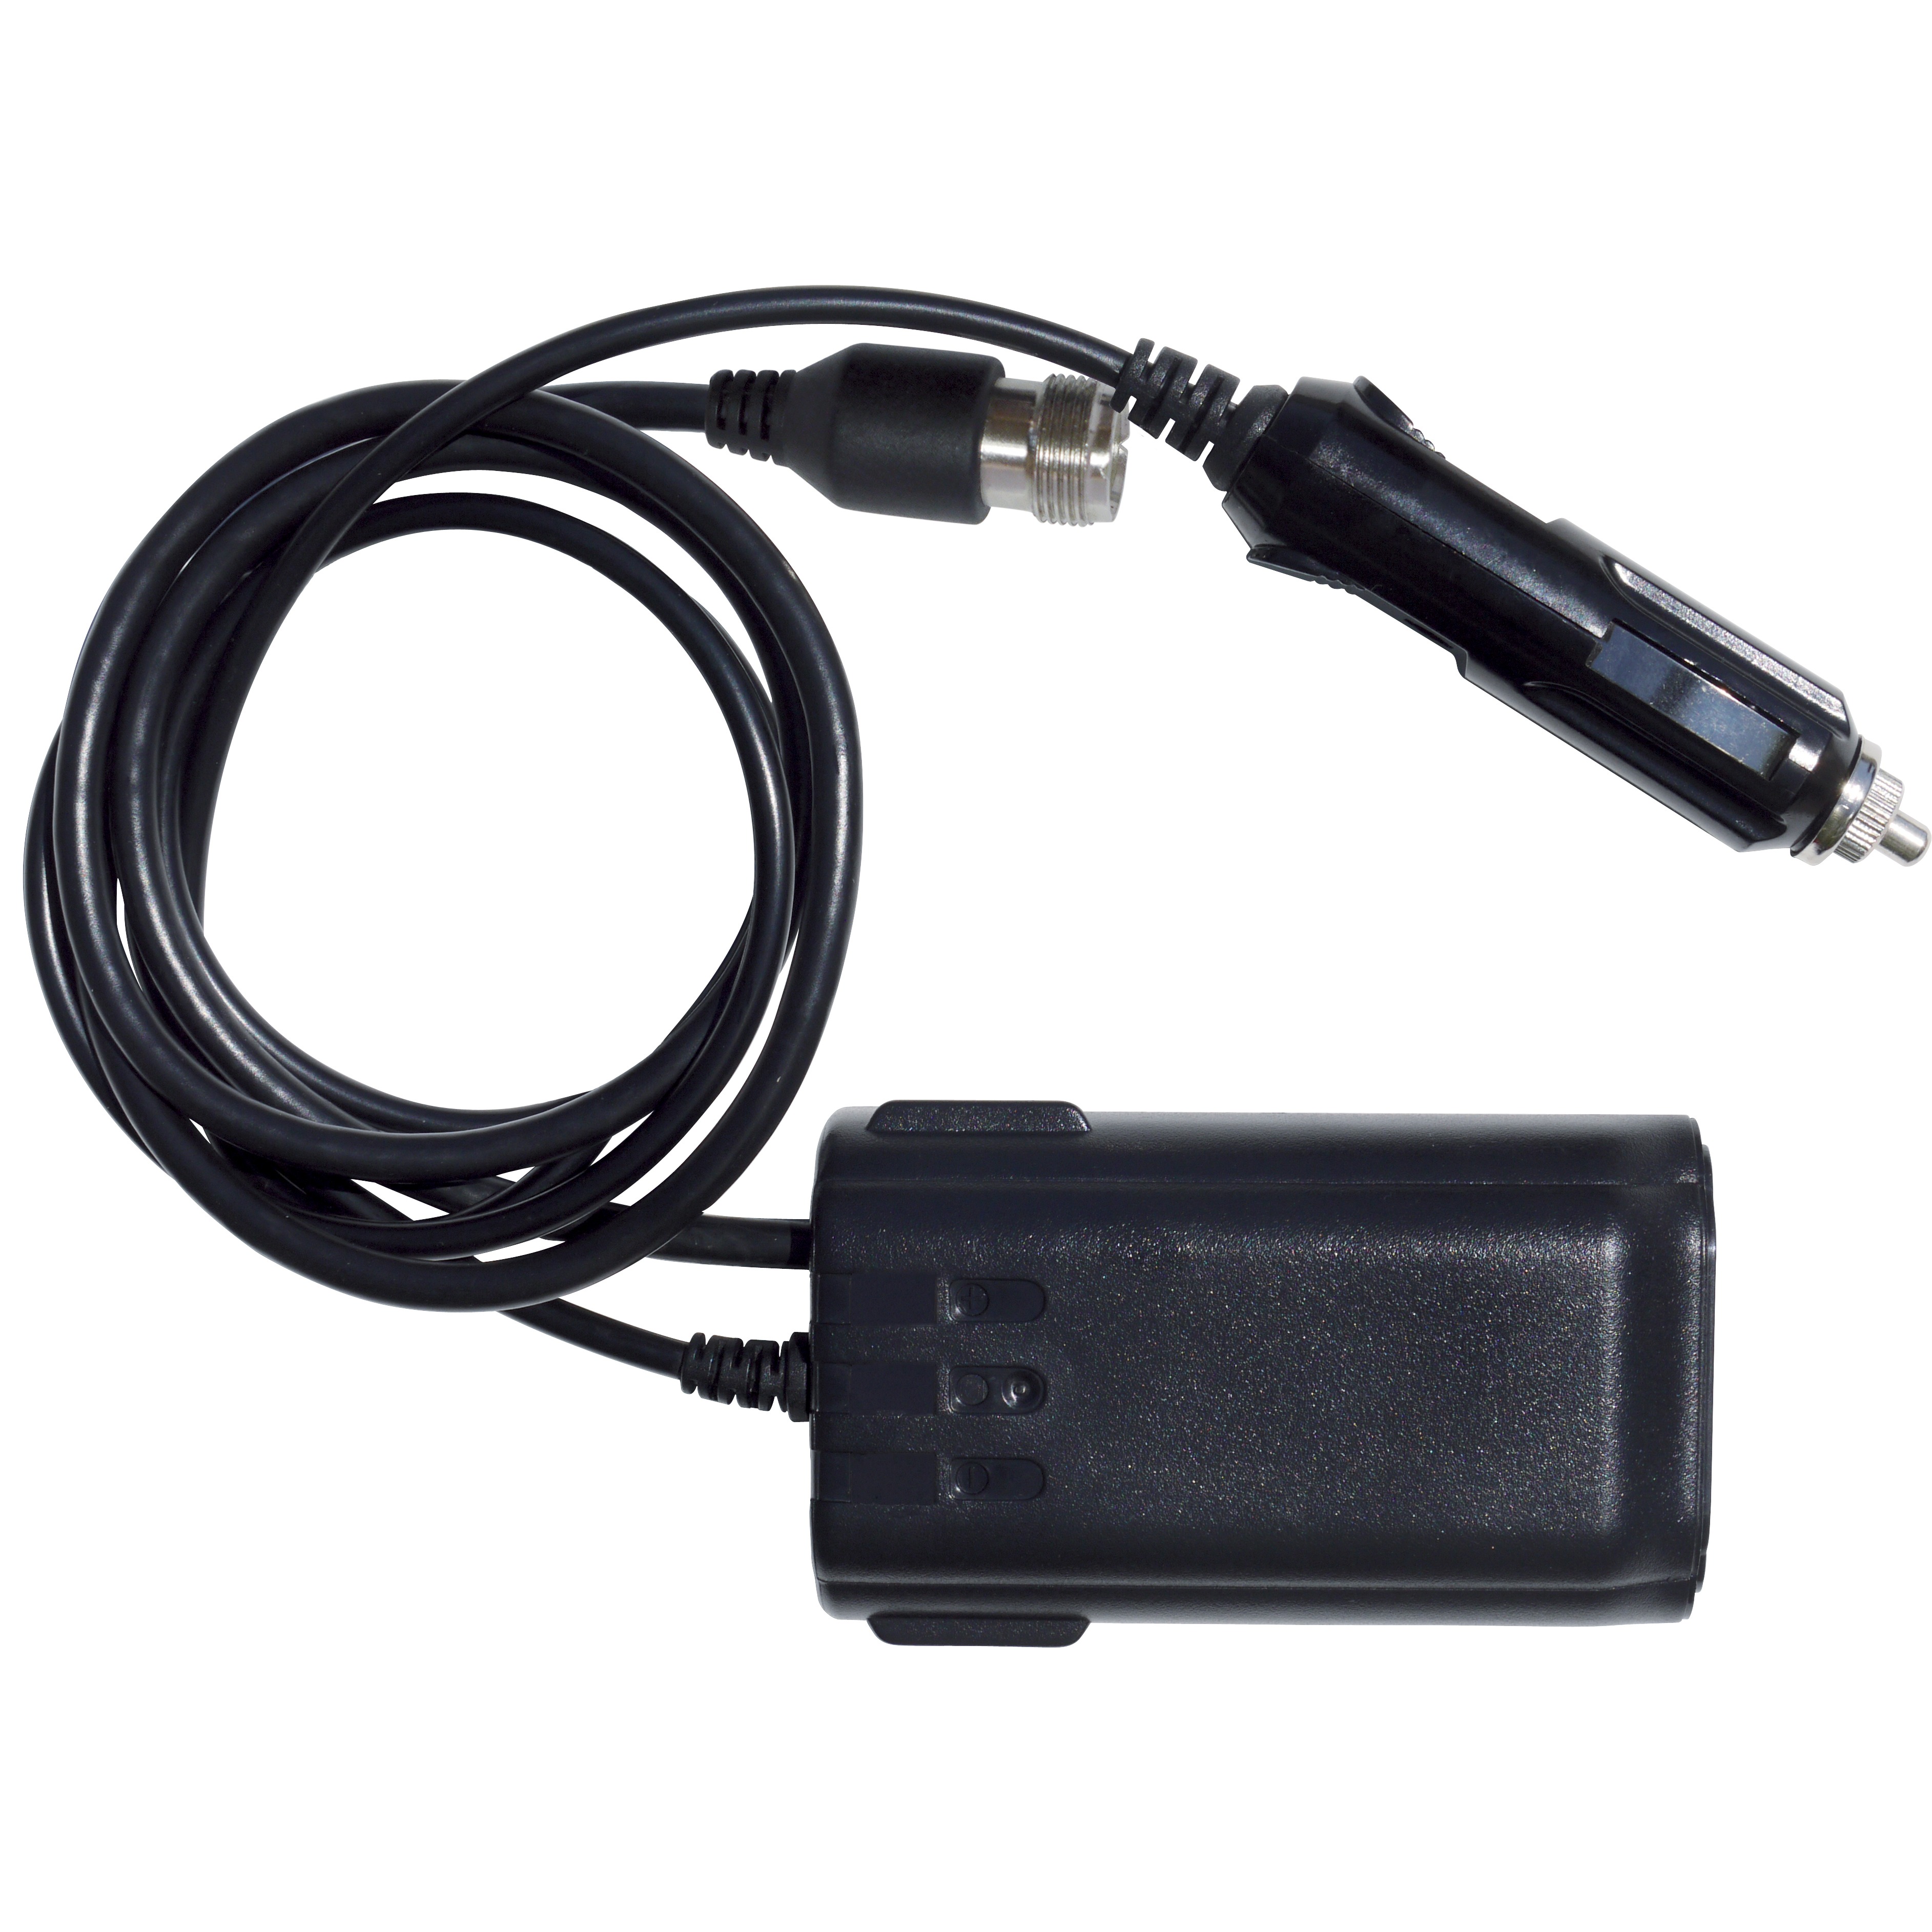 Adapter with CB antenna and cigarette lighter plug